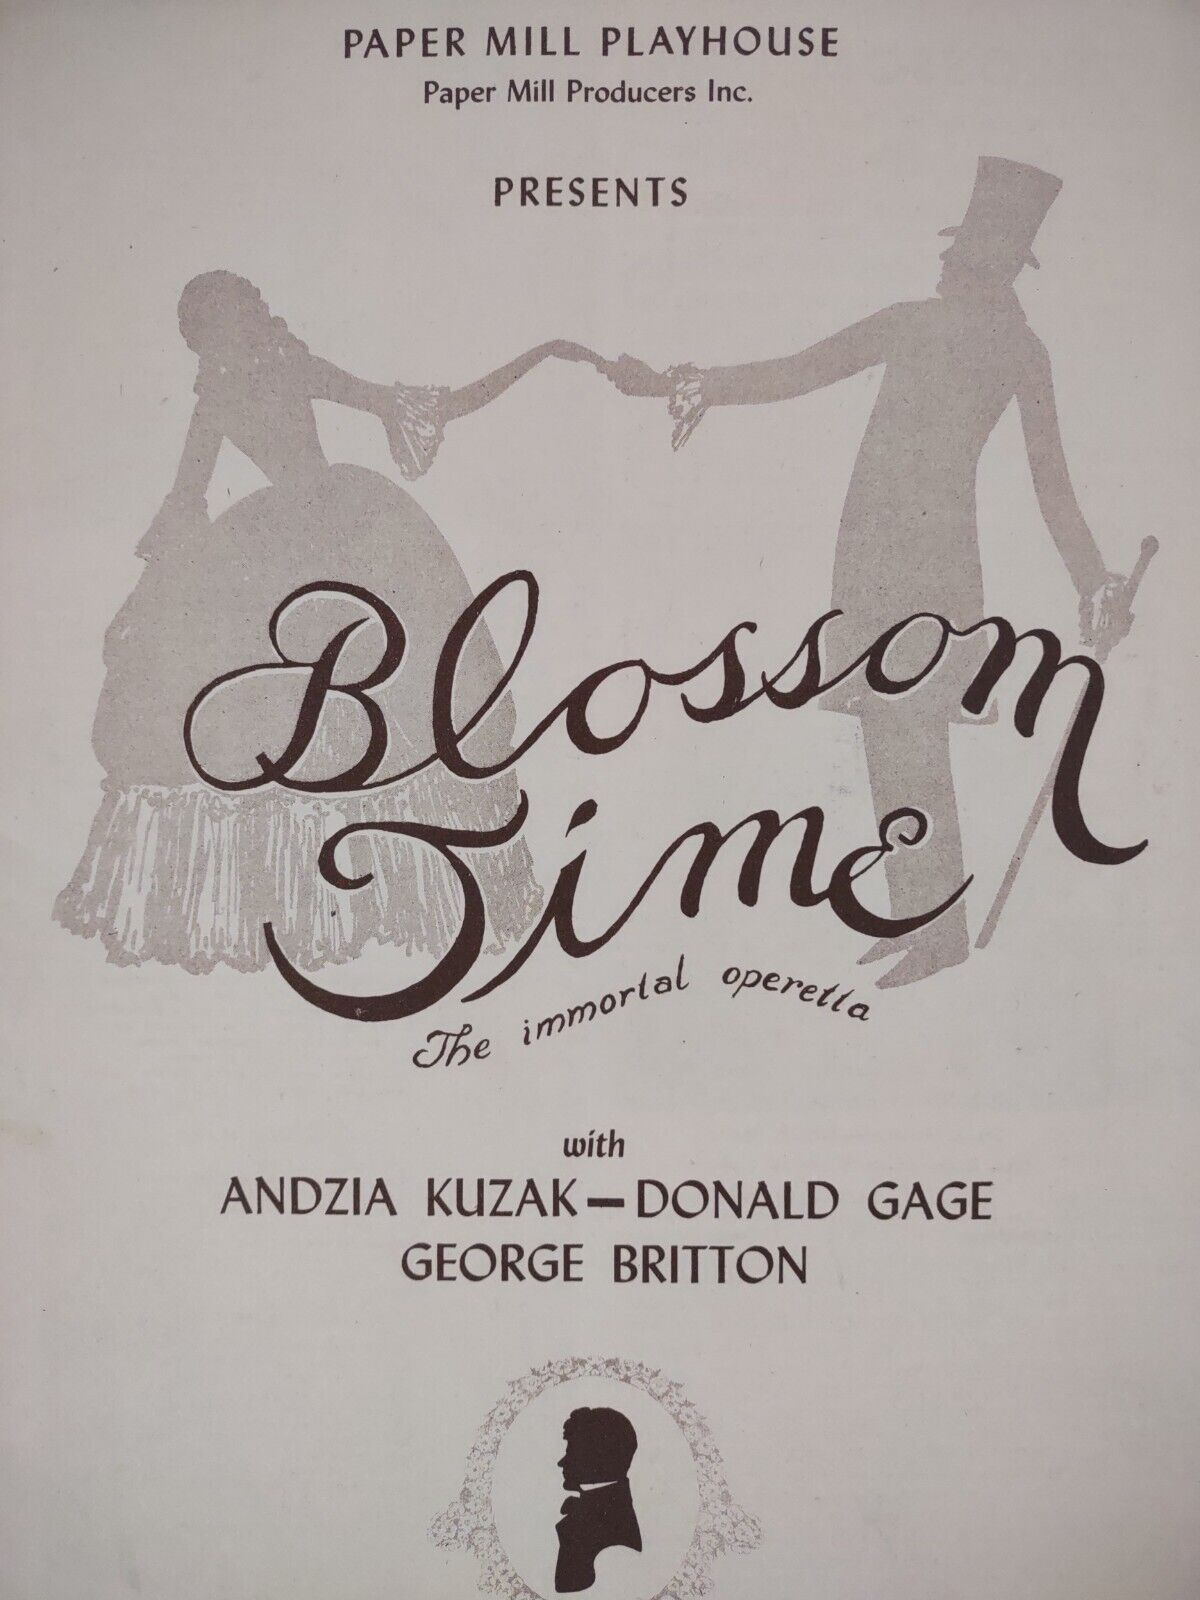 Paper Mill Playhouse 1940s Playbill Blossom Time